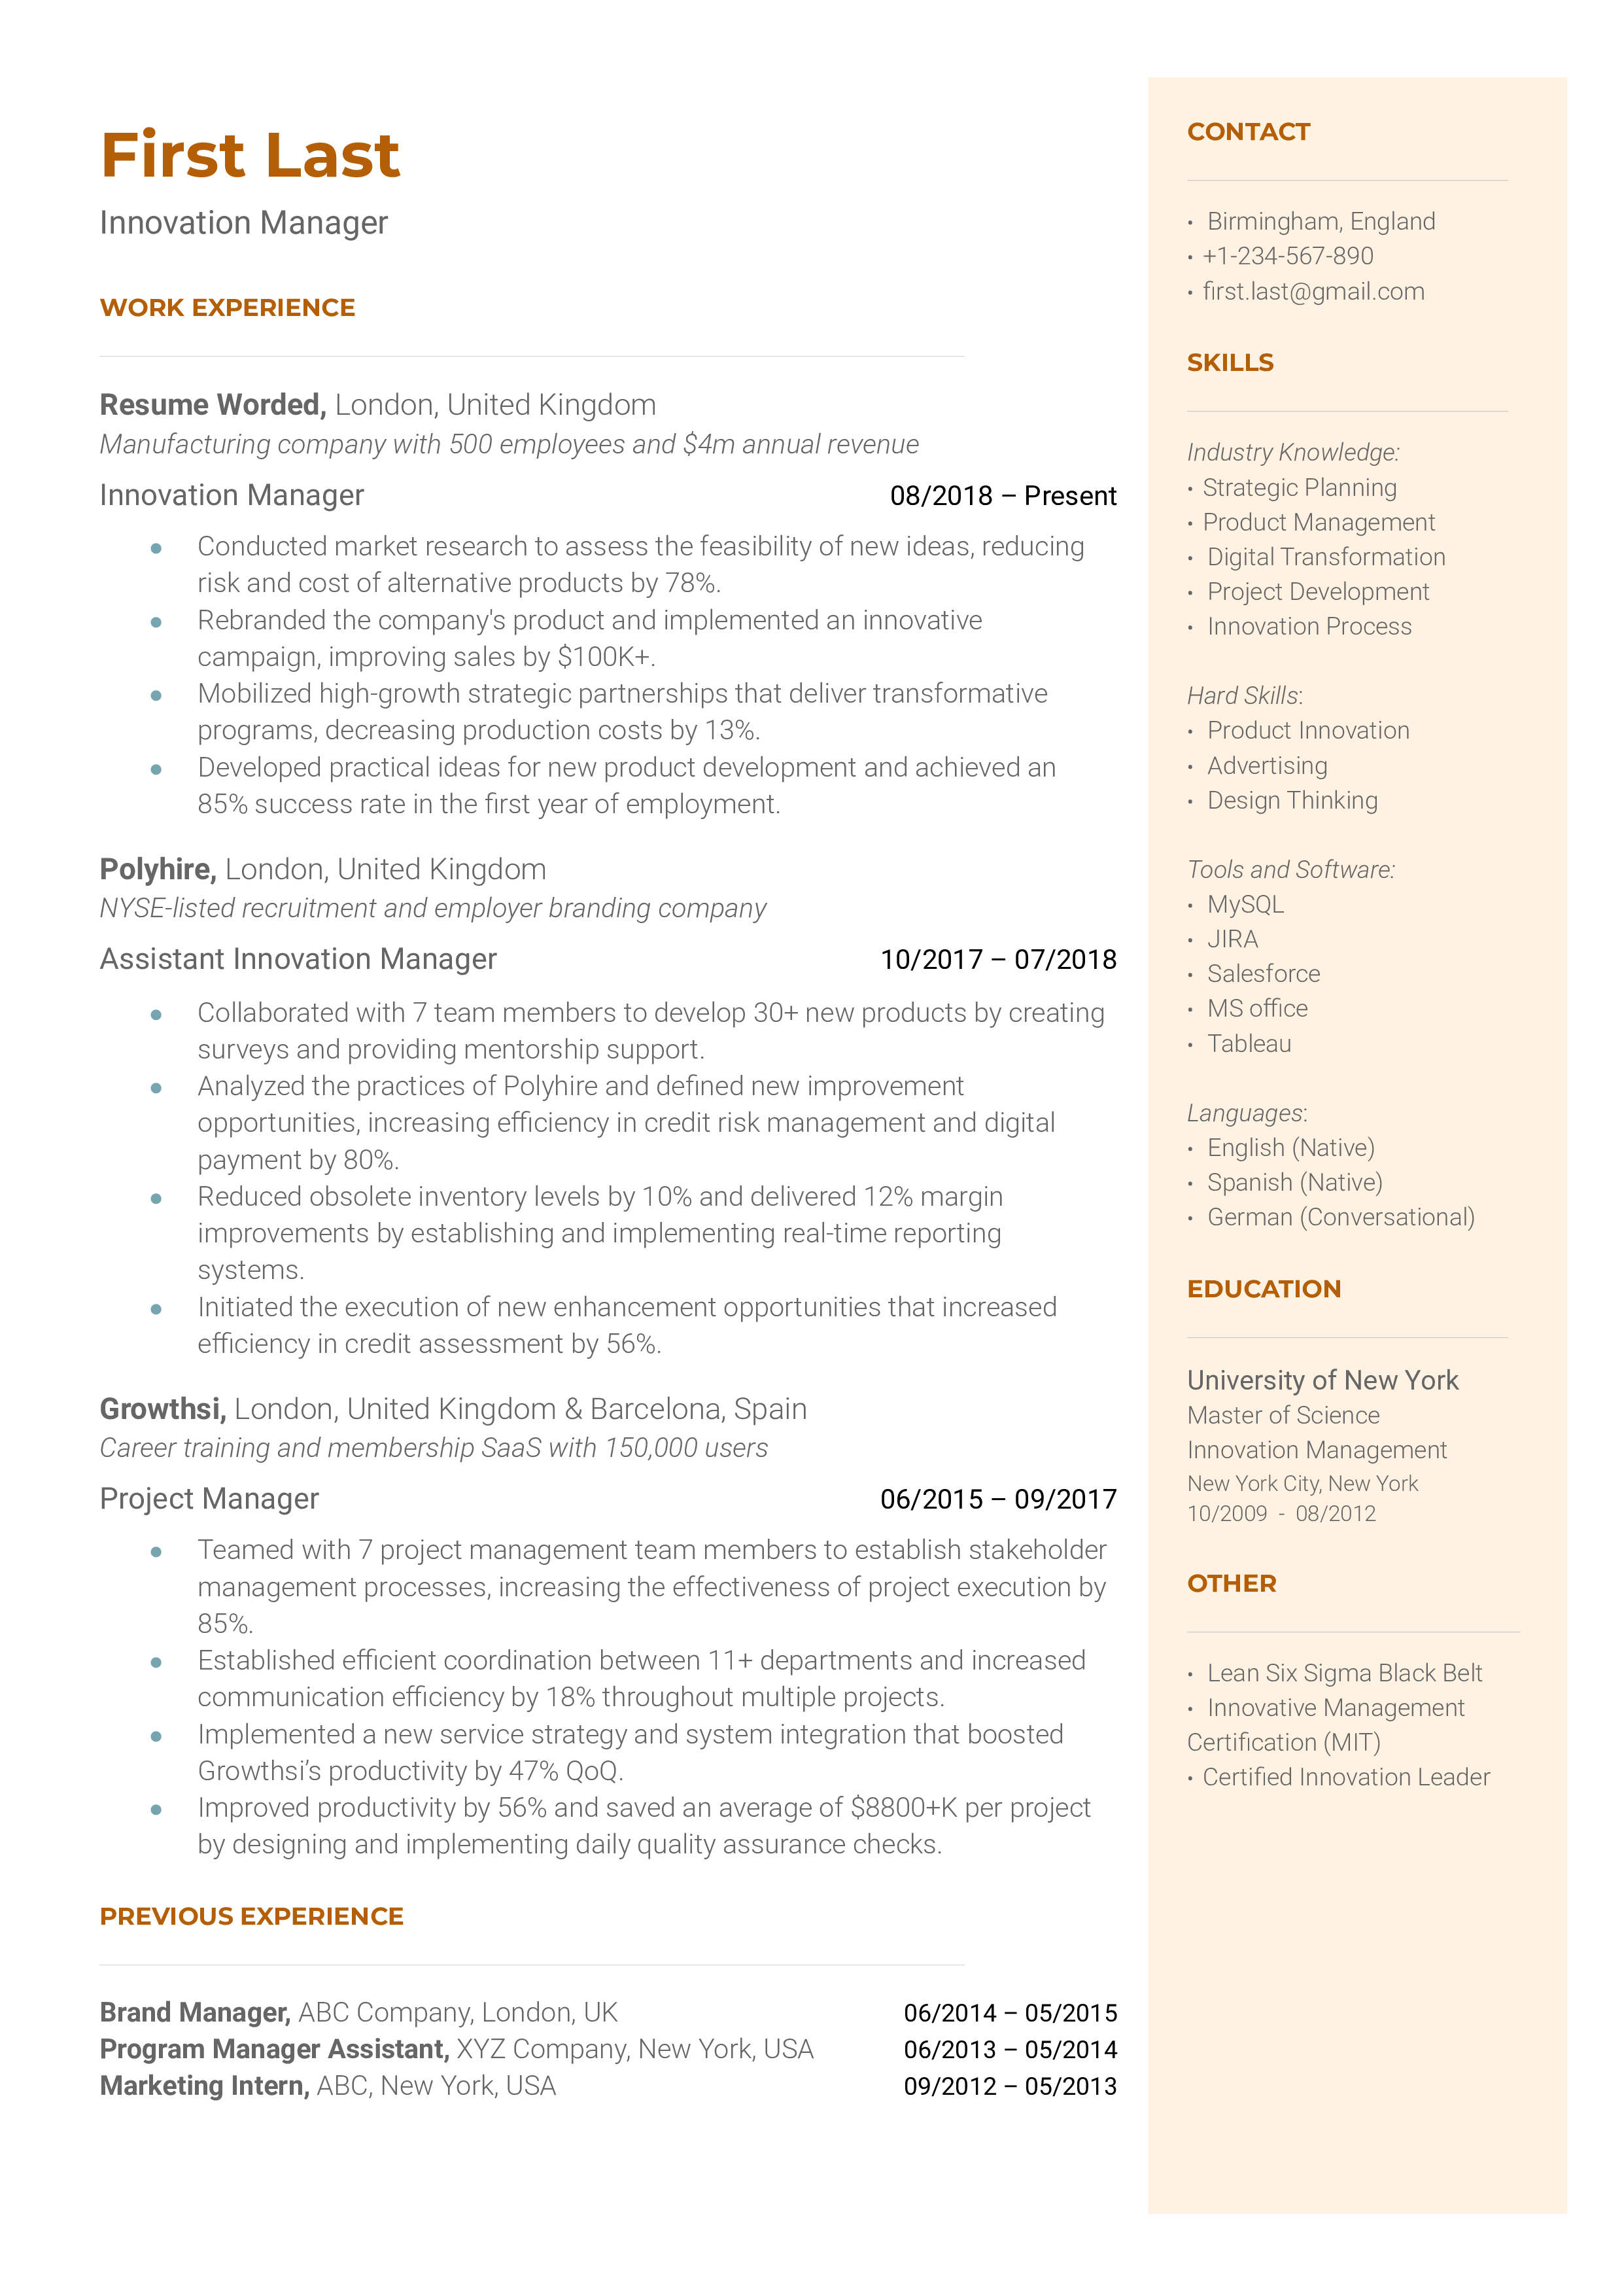 Annotated screenshot of a CV for an Innovation Manager role.